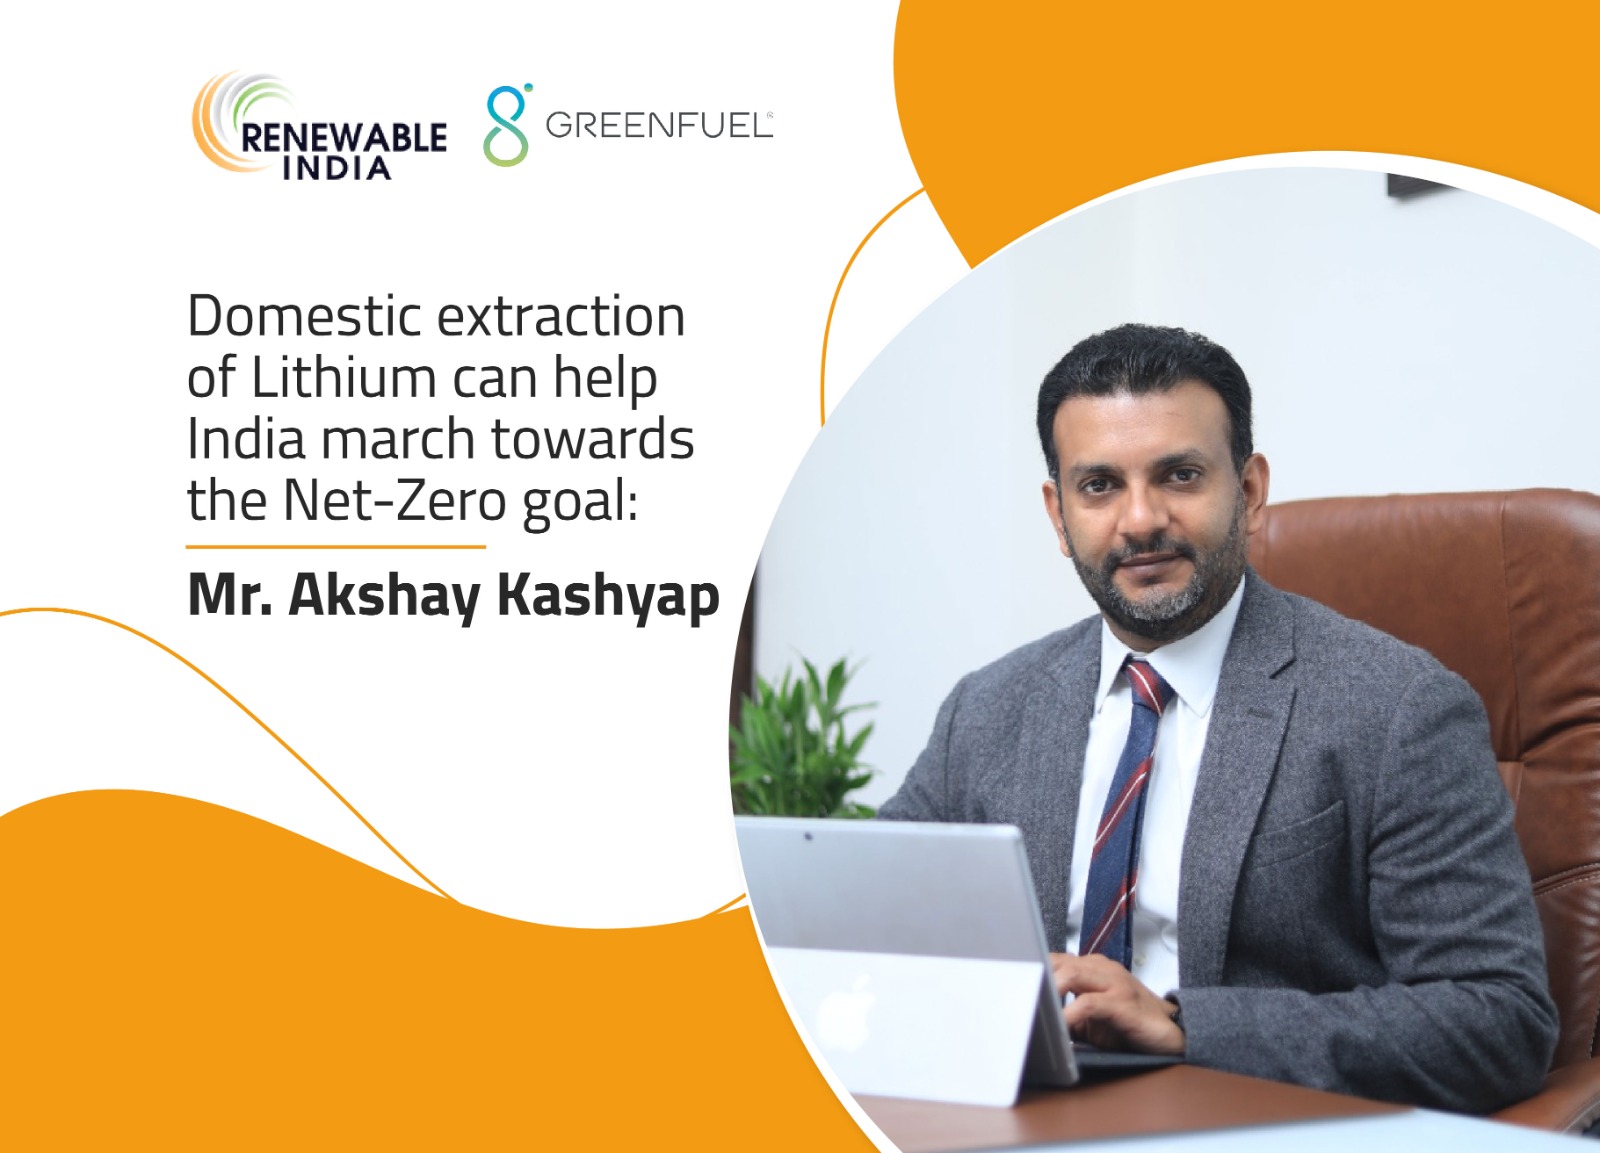 Renewable India has engaged in an exclusive interview with Mr. Akshay Kashyap, MD, Greenfuel Energy Solutions Pvt. Ltd.